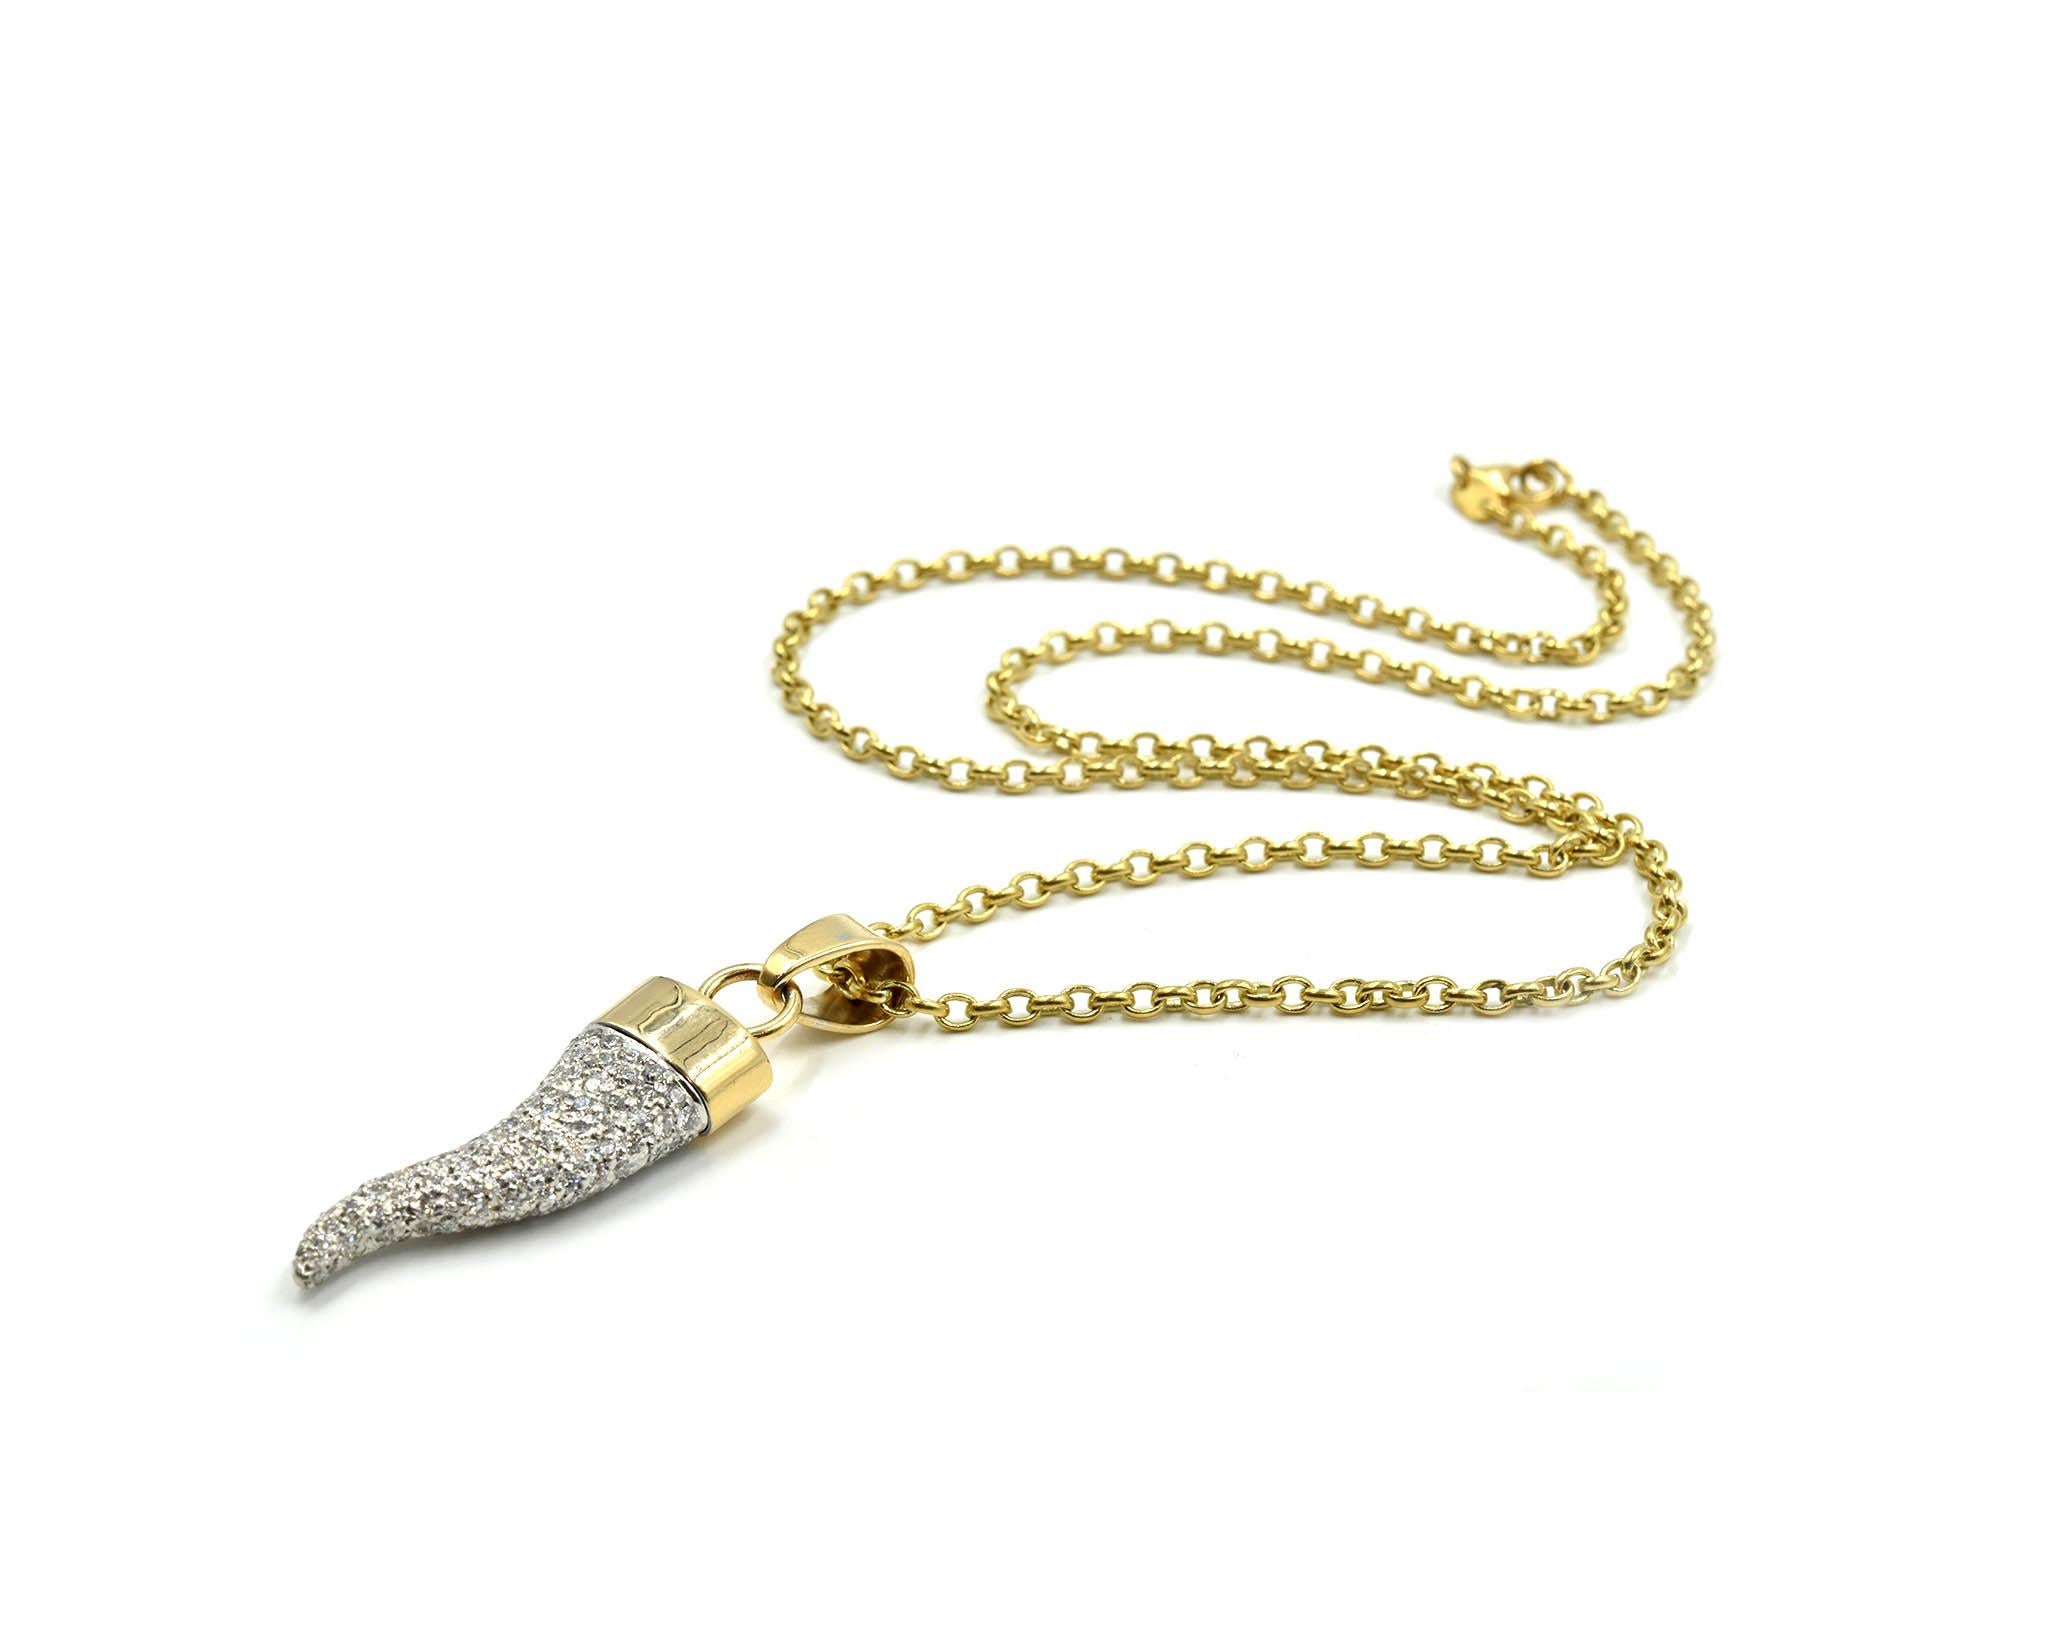 Designer: custom design
Material: 18k yellow gold
Diamonds: 175 round brilliant cuts = 2.62 carat total weight
Color: H-I
Clarity: VS
Dimensions: Italian horn pendant measures 1 1/2-inches long and a 1/2-inch wide, necklace measures 20-inches